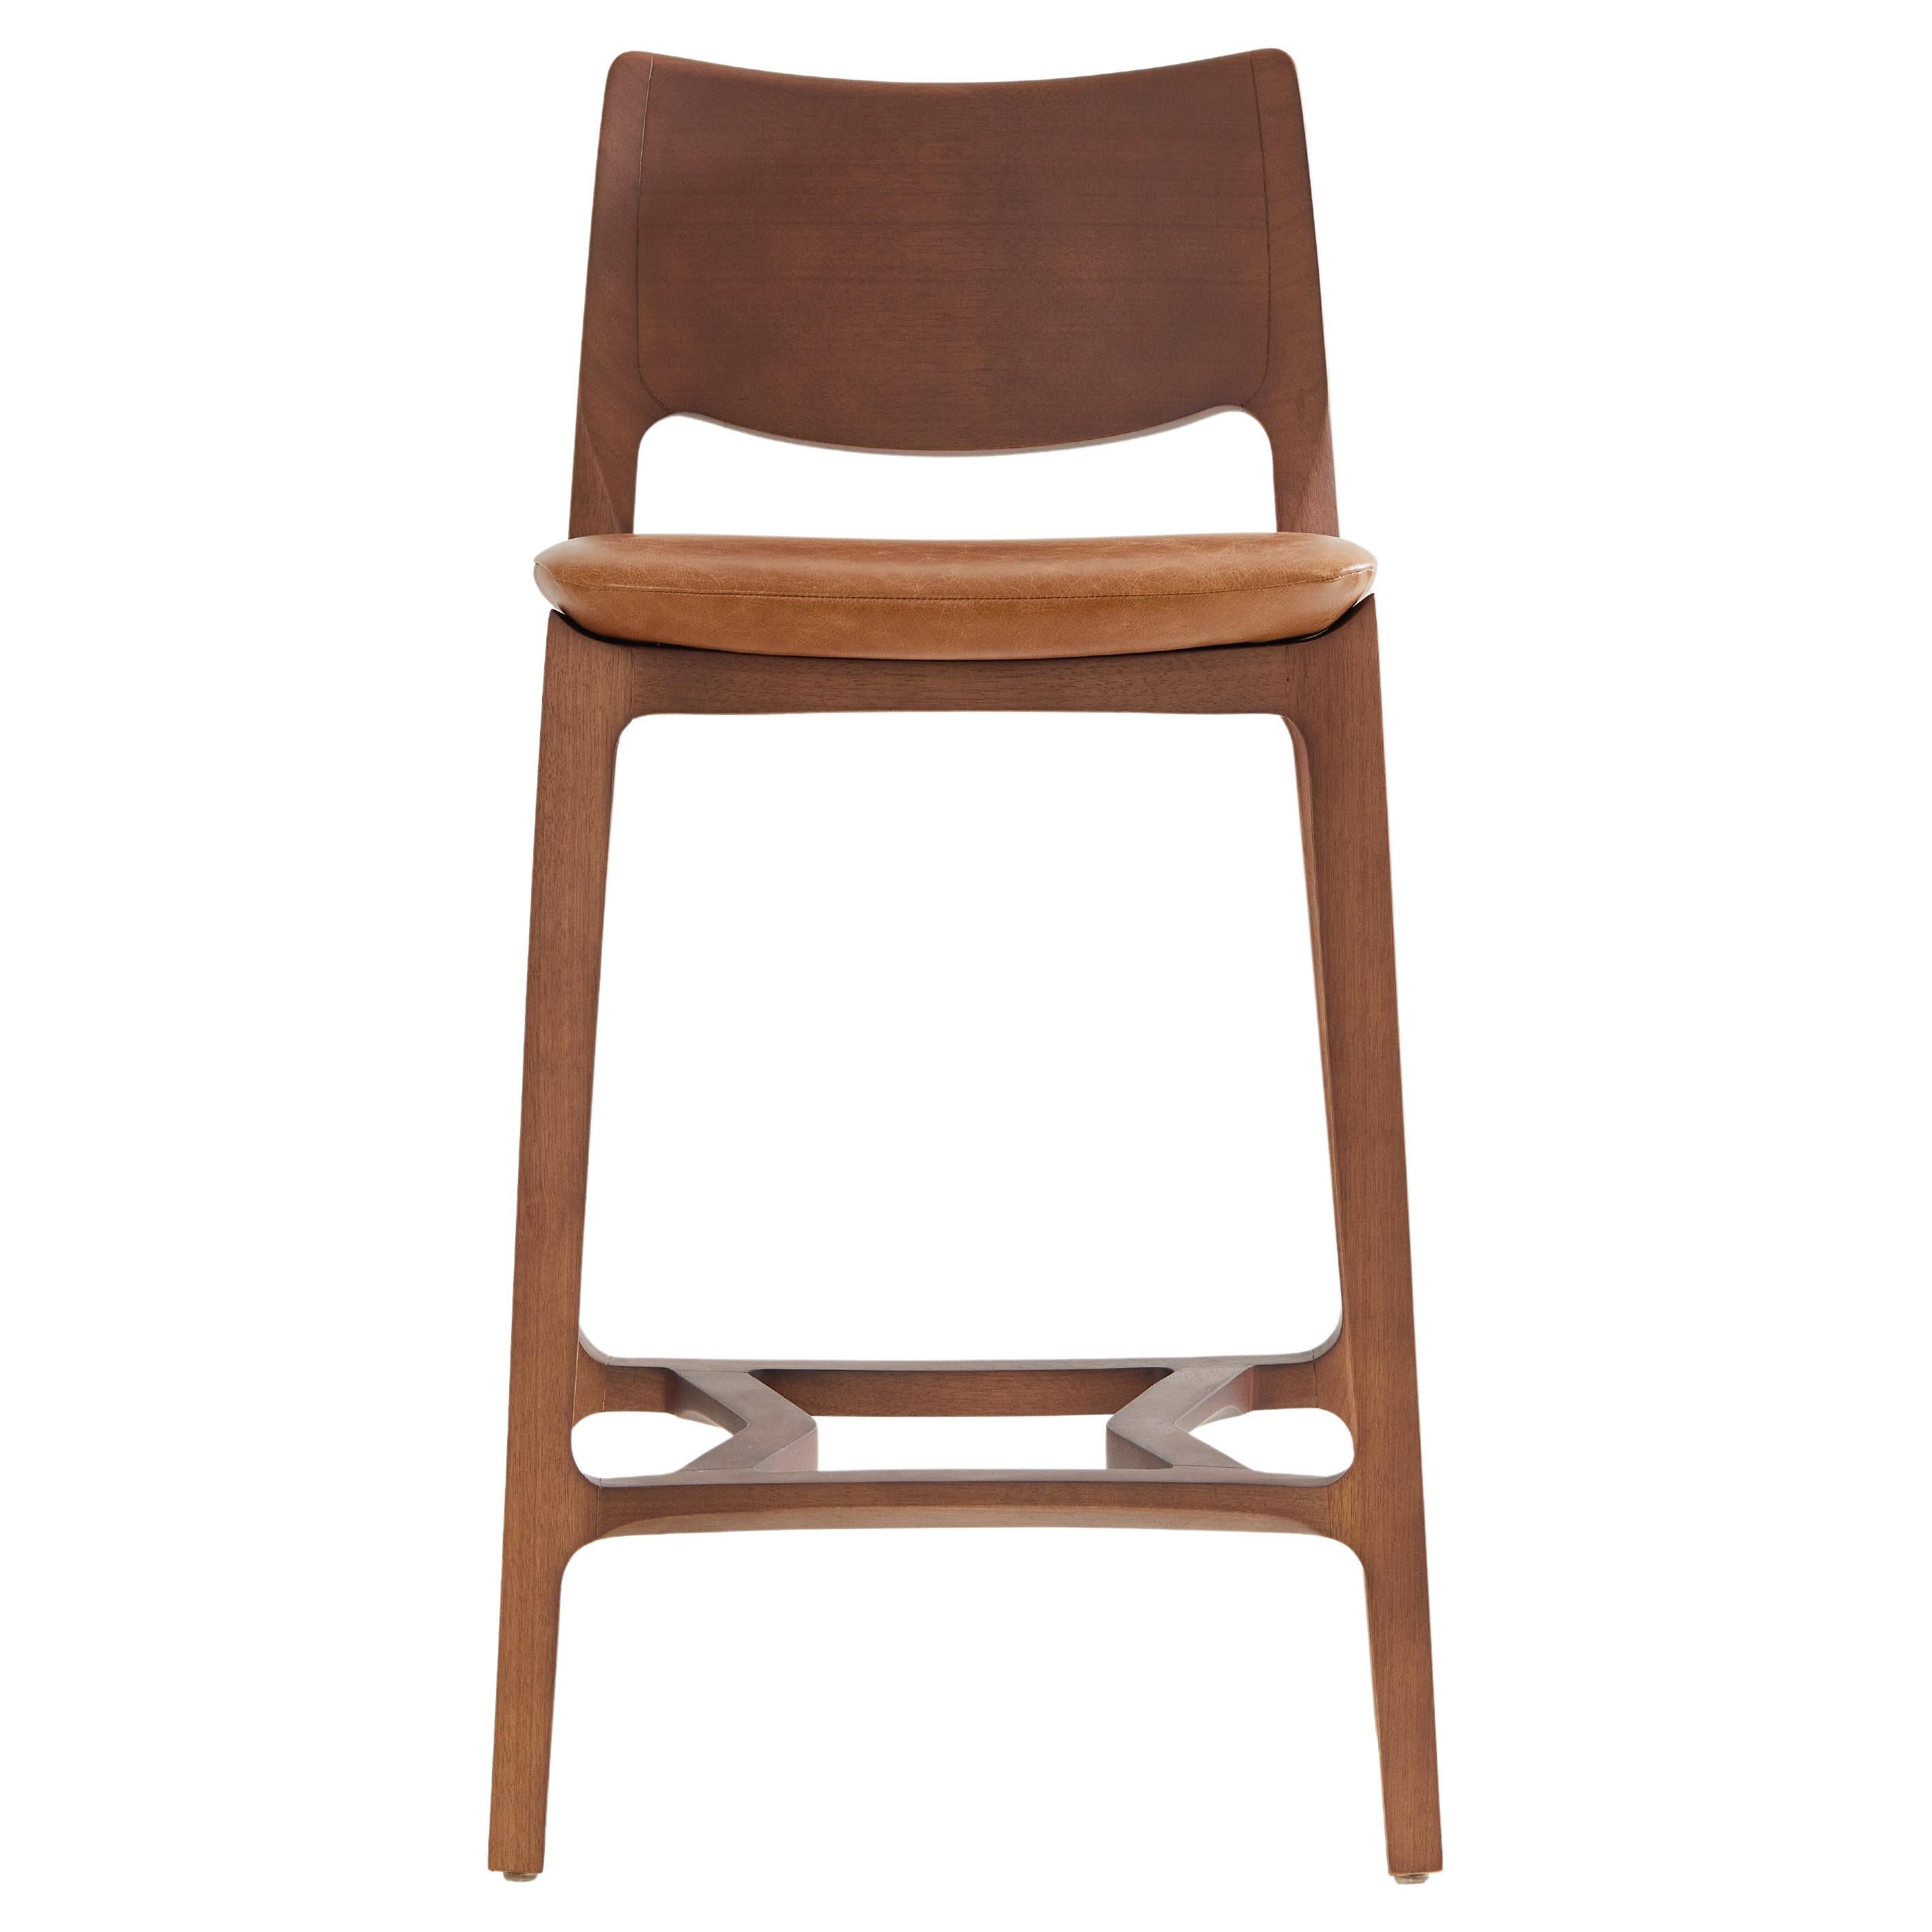 Aurora stool, walnut solid wood finish, solid back, camel leather seating For Sale